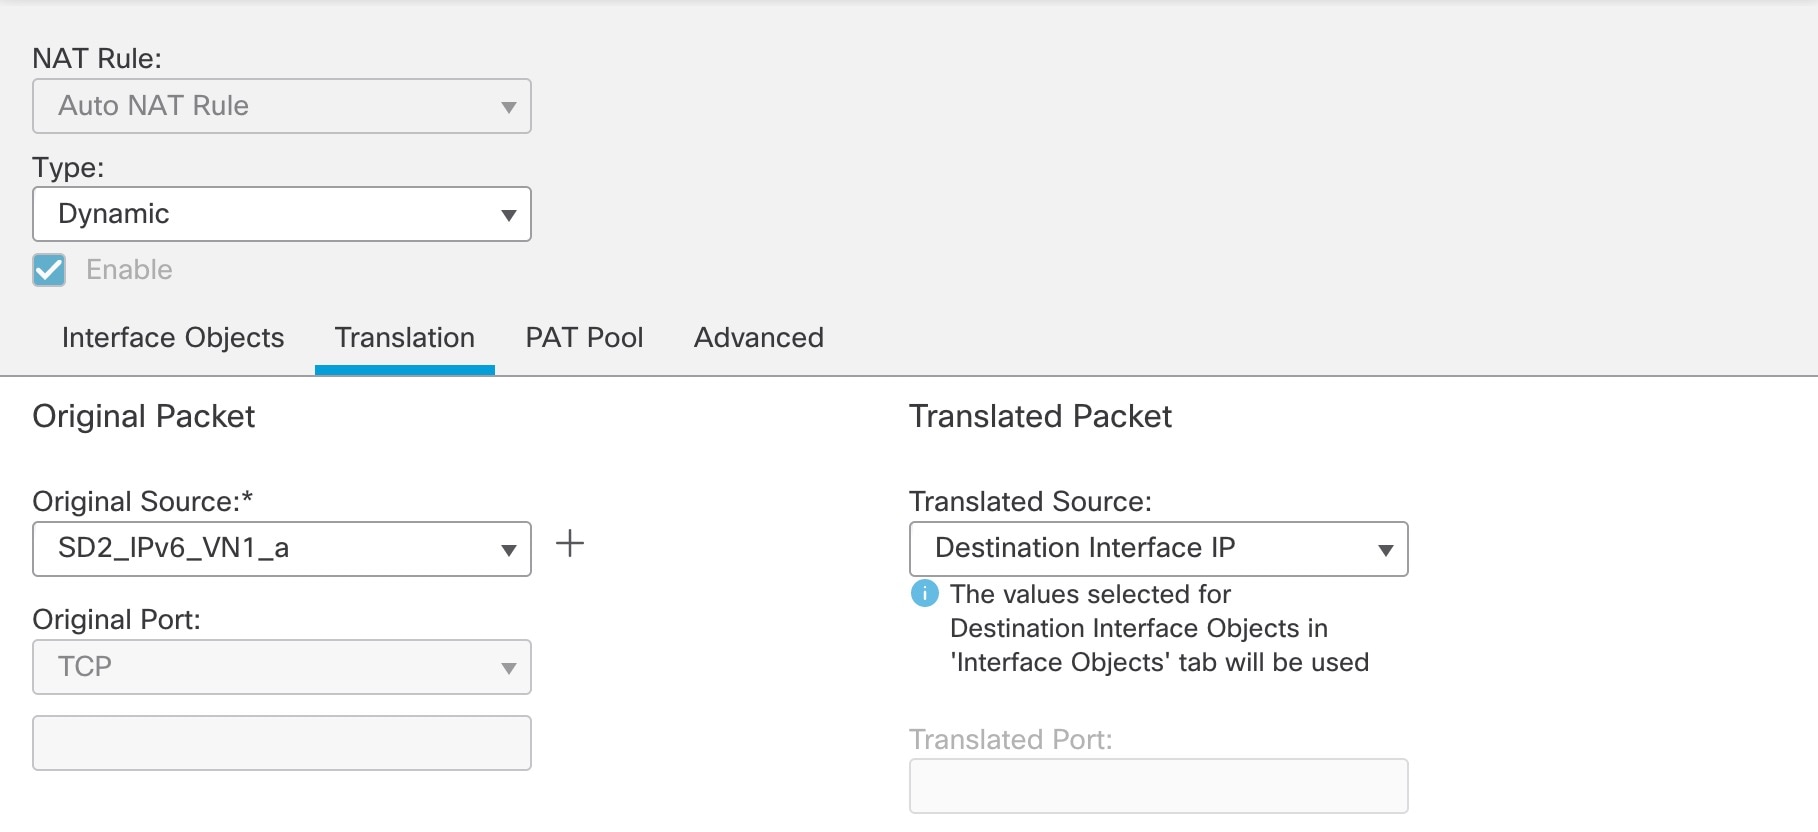 The Translation tab displays the Original Source and Translated Source drop-down lists, where you can configure the original source and translated source.